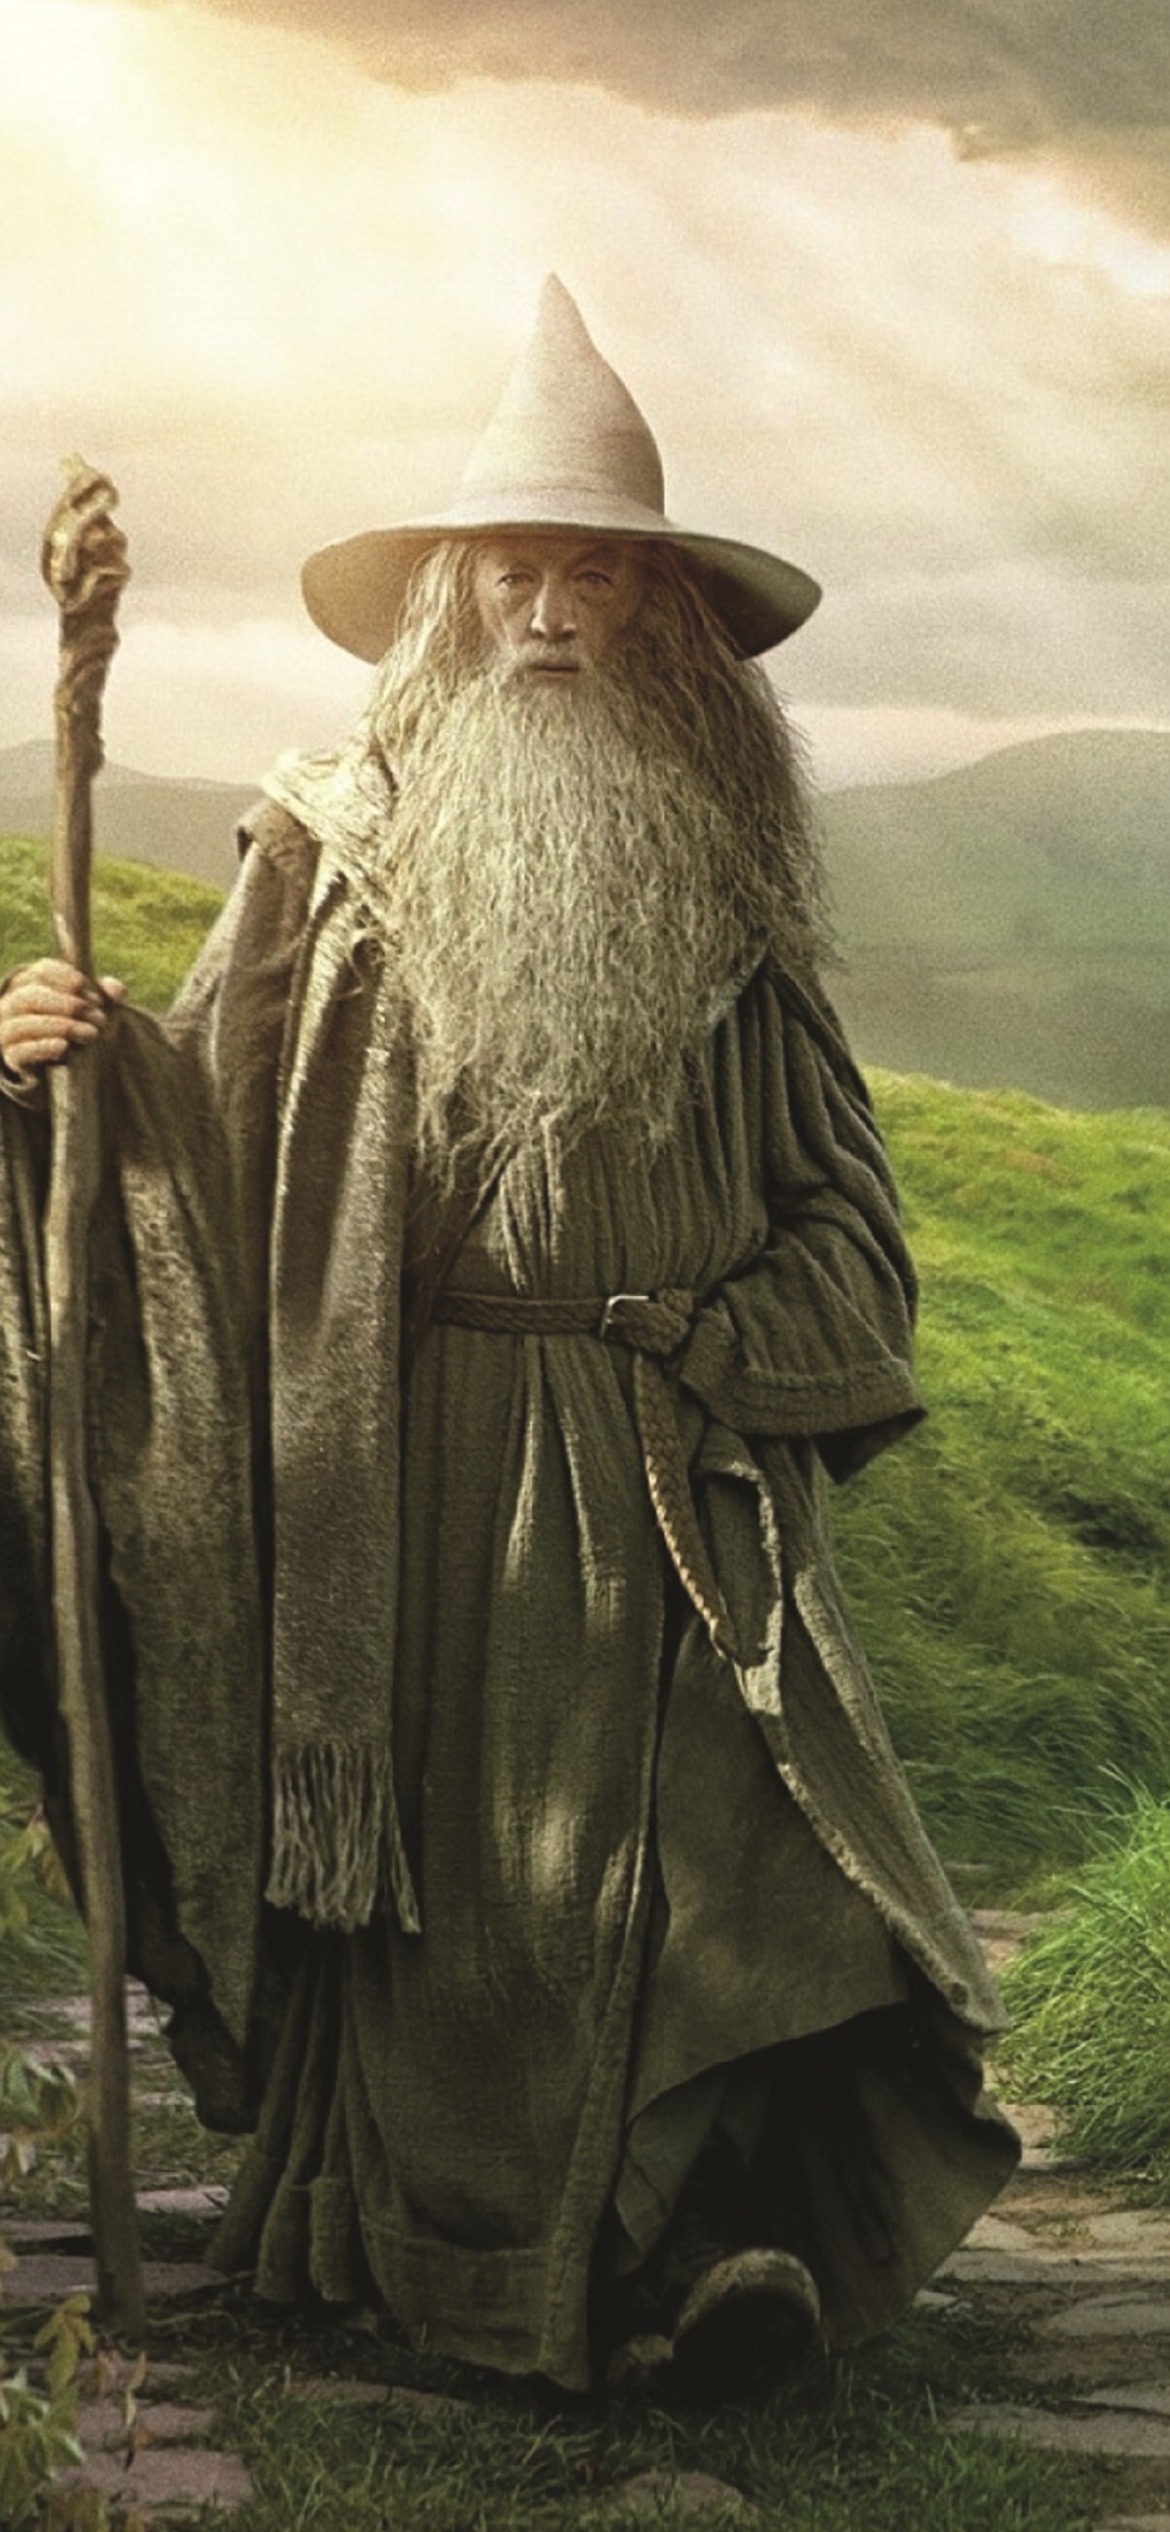 Gandalf - Lord of the Rings Tolkien wallpaper 1170x2532